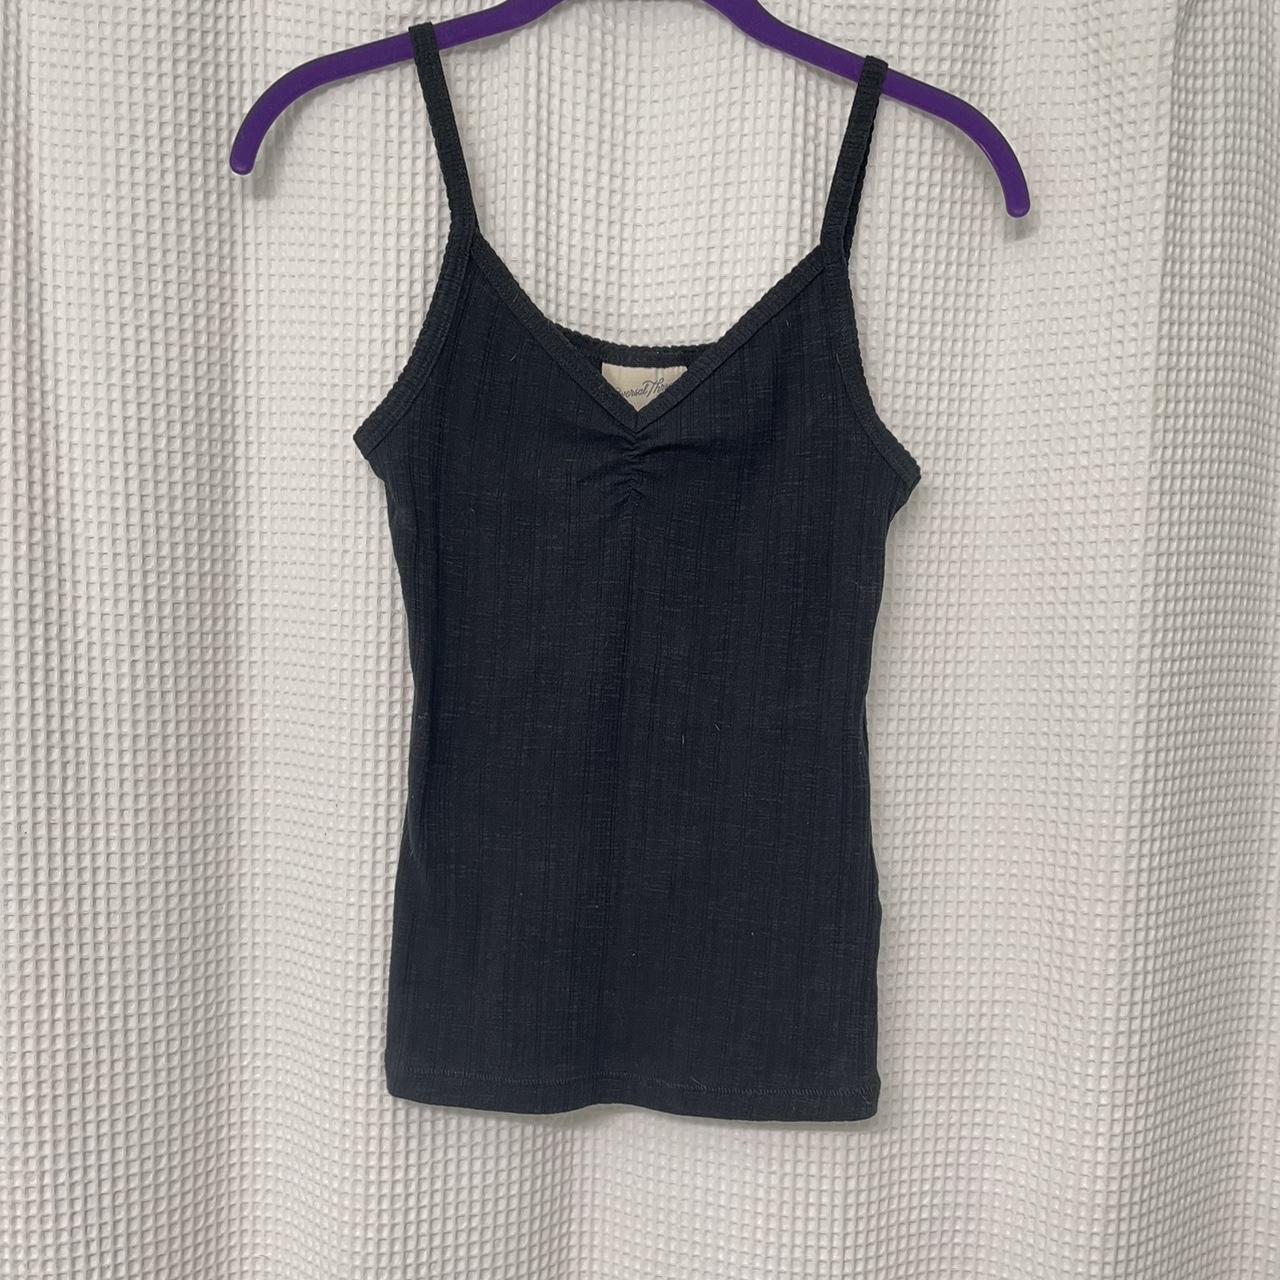 An adorable full length textured black tank top with... - Depop